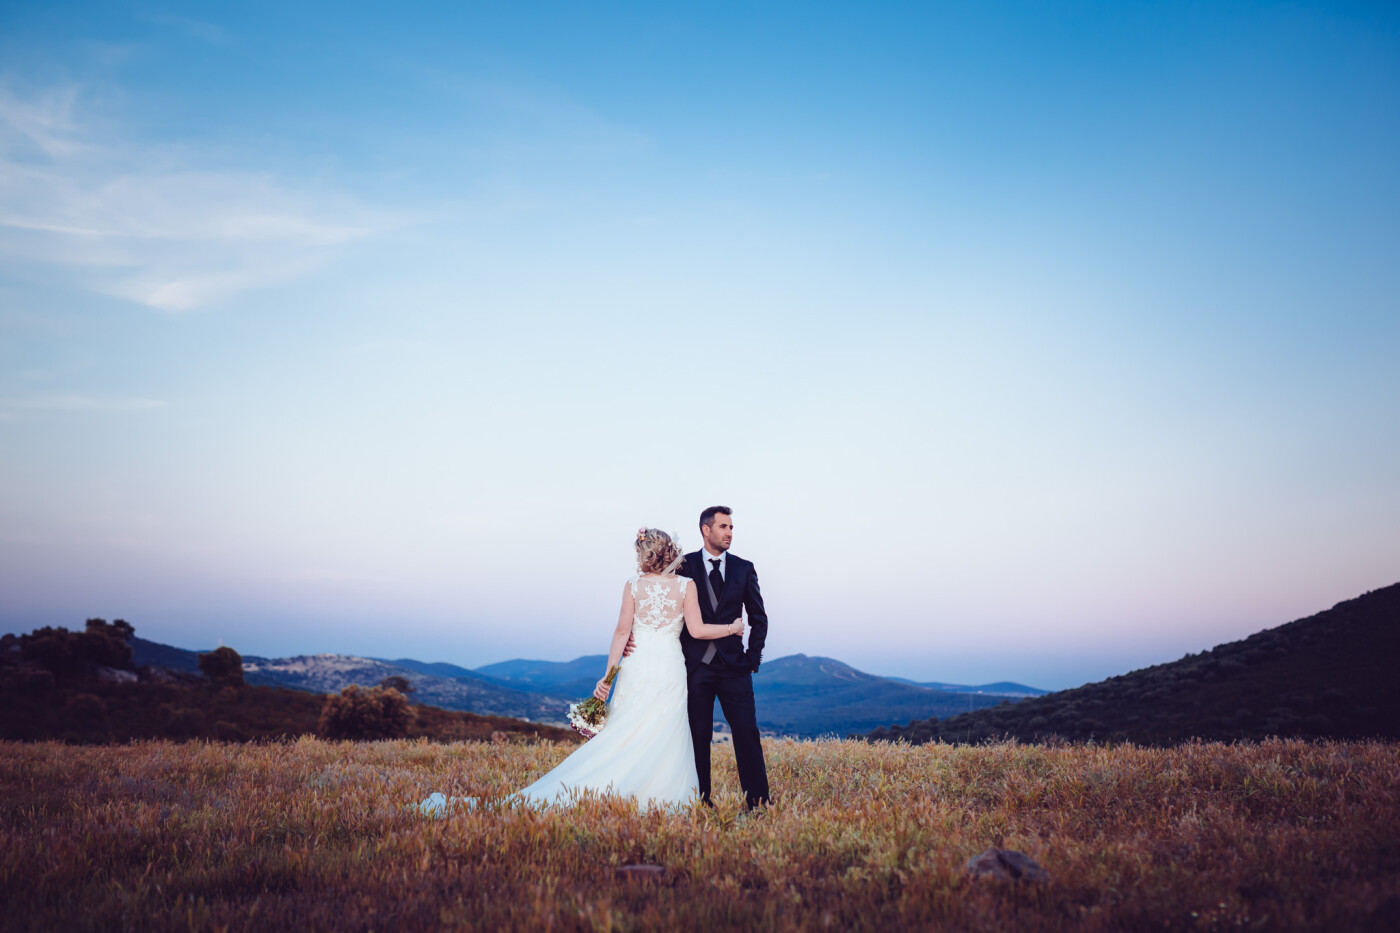 Mary and Enrique are a couple from Higuera de la Serena, Badajoz, Spain.<br />
We took several pictures in a forest of eucalyptus, then we decided to climb a hill in search of open spaces,  the sunset left us a magical light.